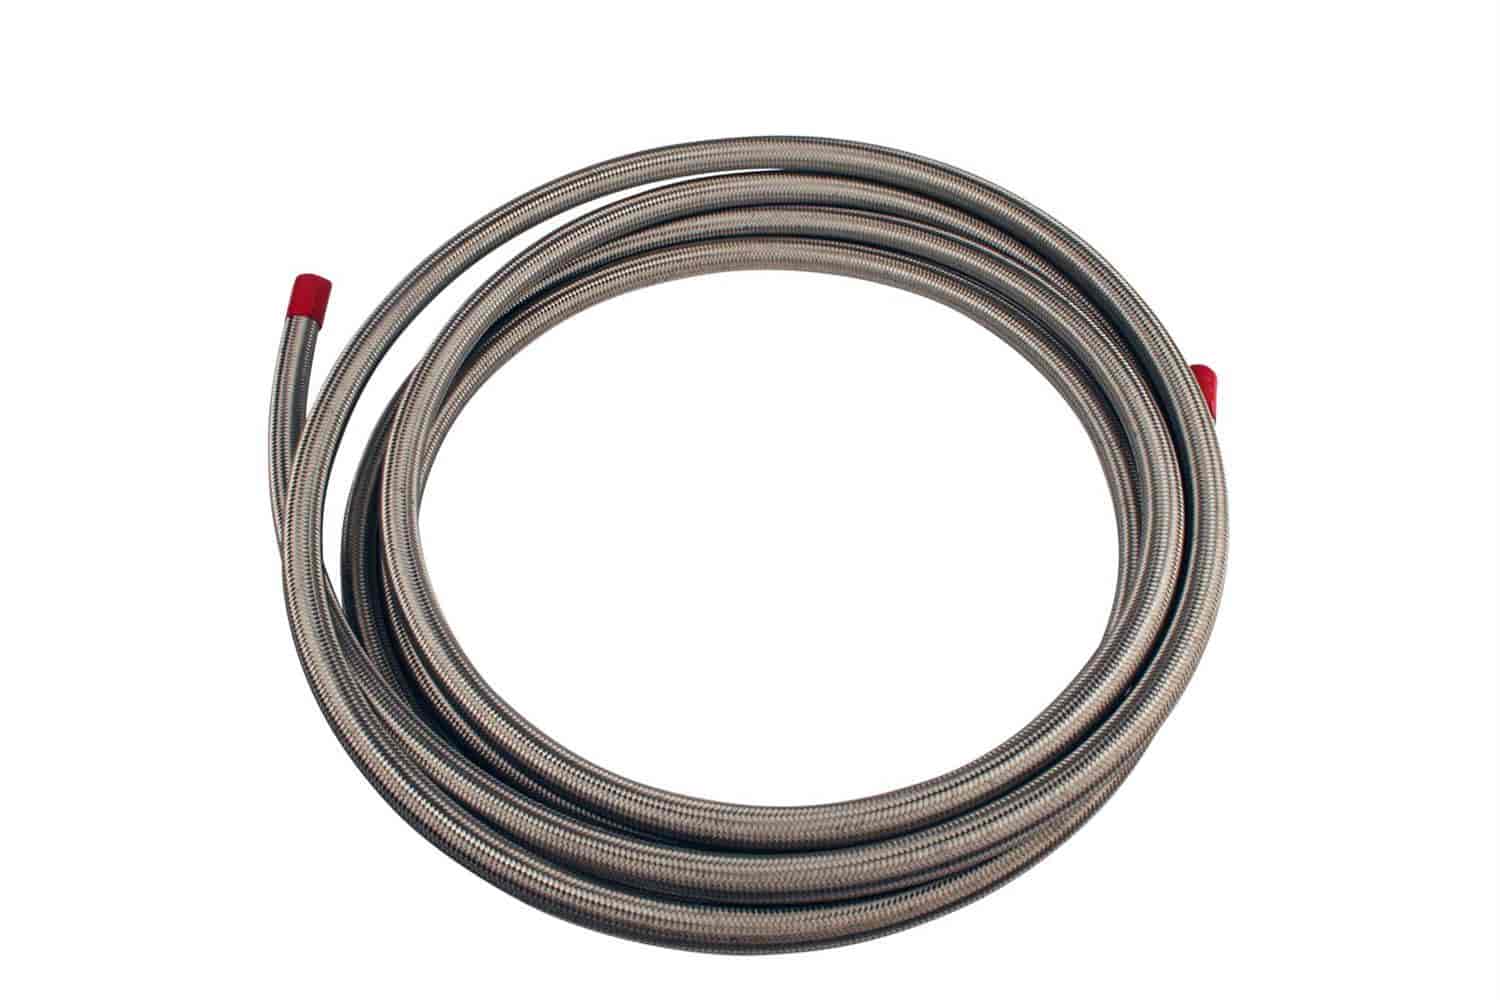 Braided Stainless Steel Fuel Hose -8AN x 16 ft